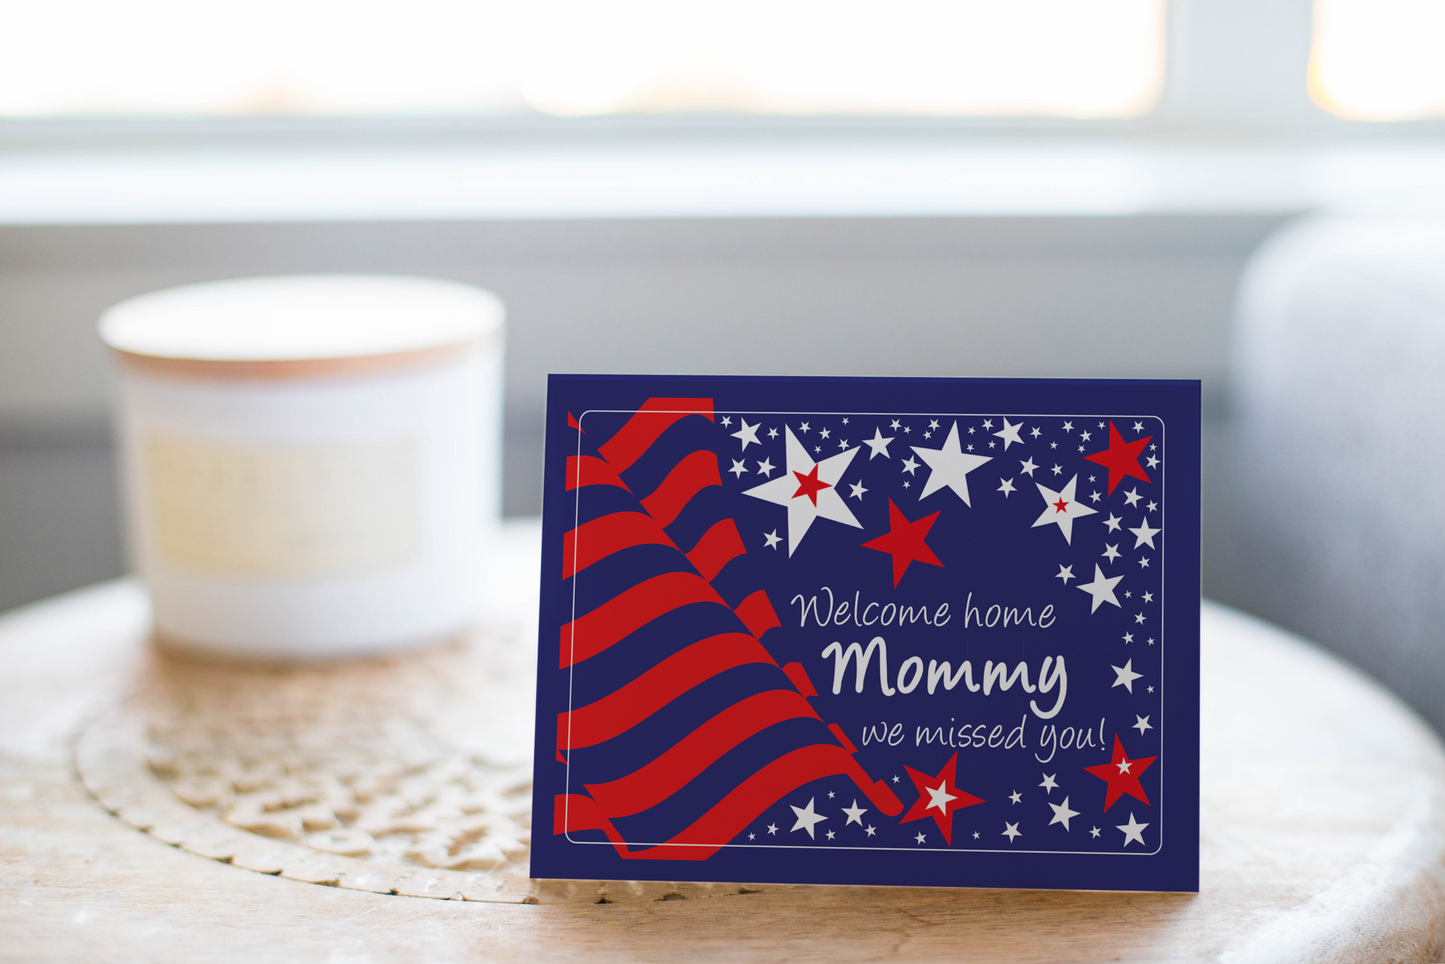 Welcome Home Mommy, Greeting Card For Homecoming Military.